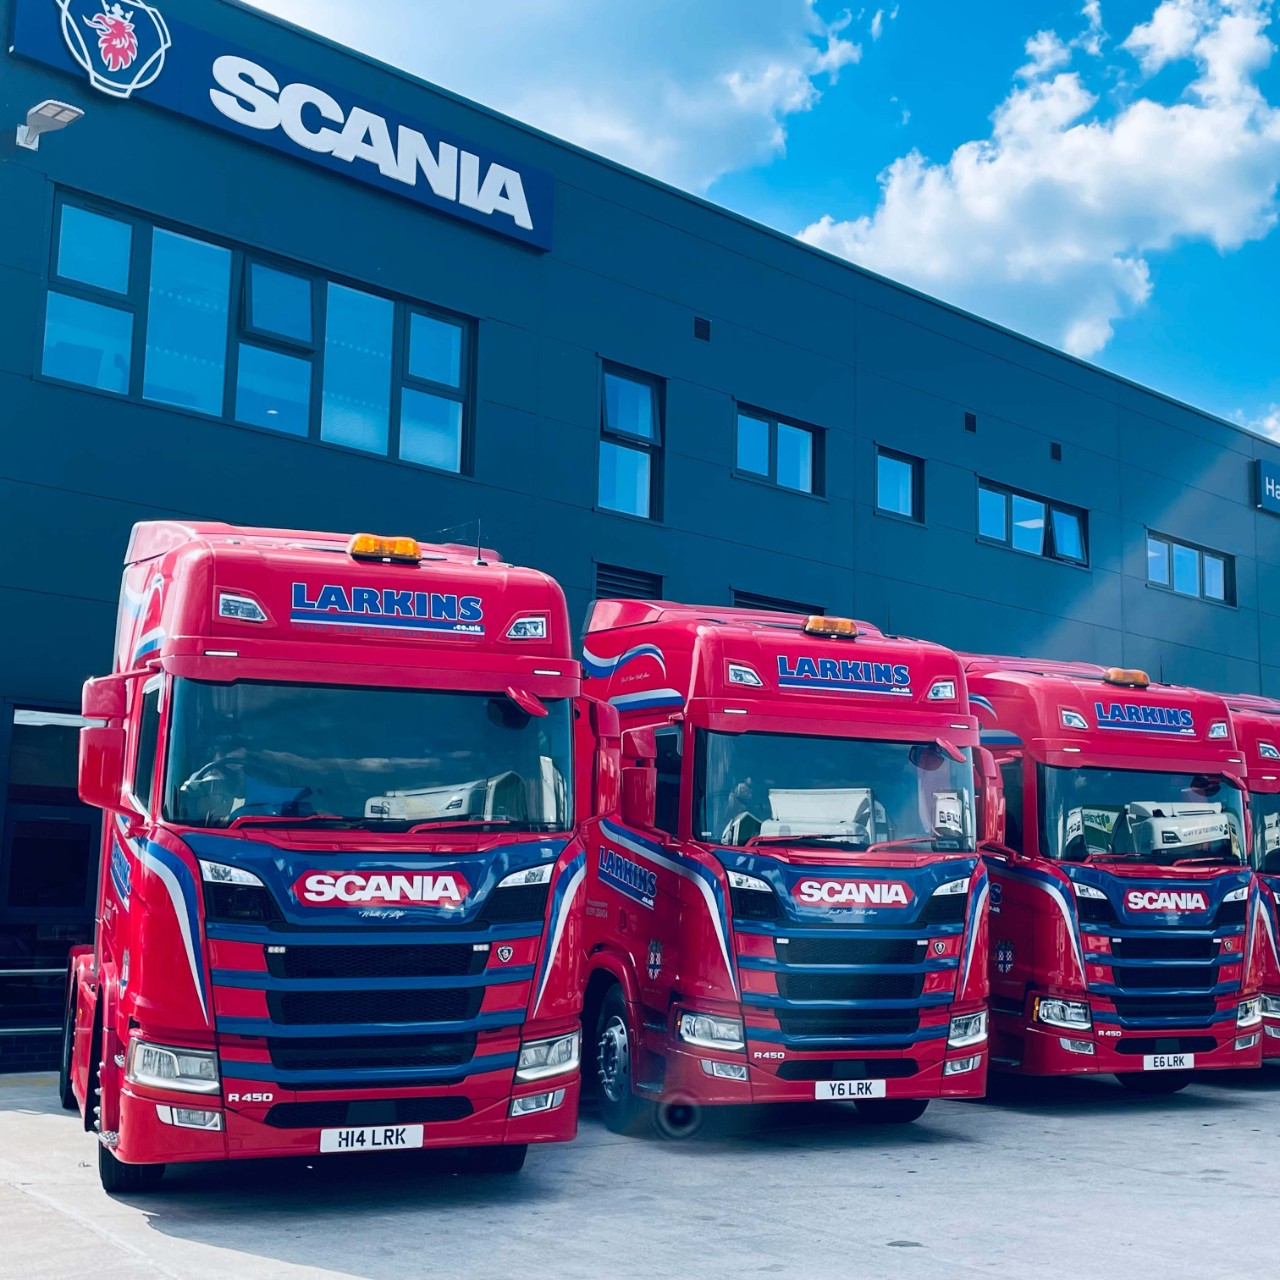 Larkins Transport Limited grows with Scania Financial Services